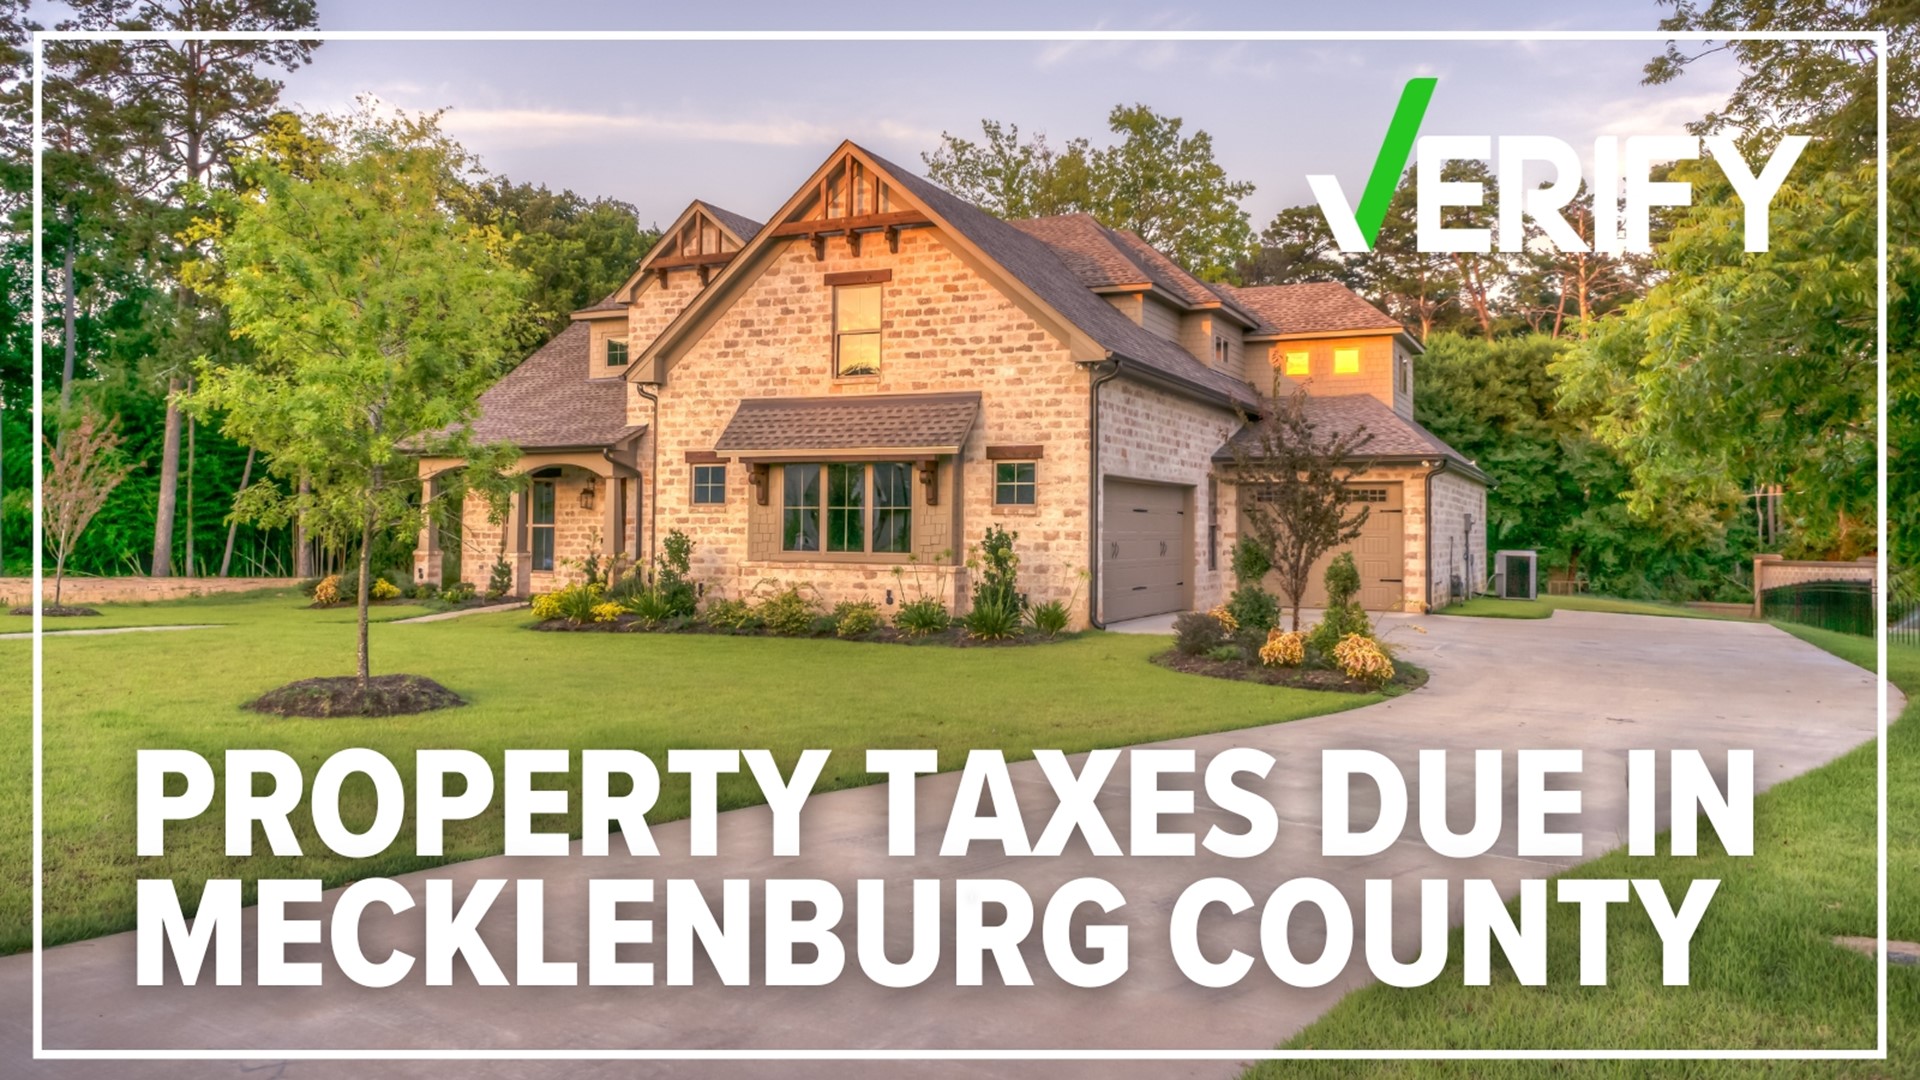 According to the Mecklenburg County Tax Collector, if you don't pay by Jan. 5, you will have to pay a 2% interest rate on your property taxes.